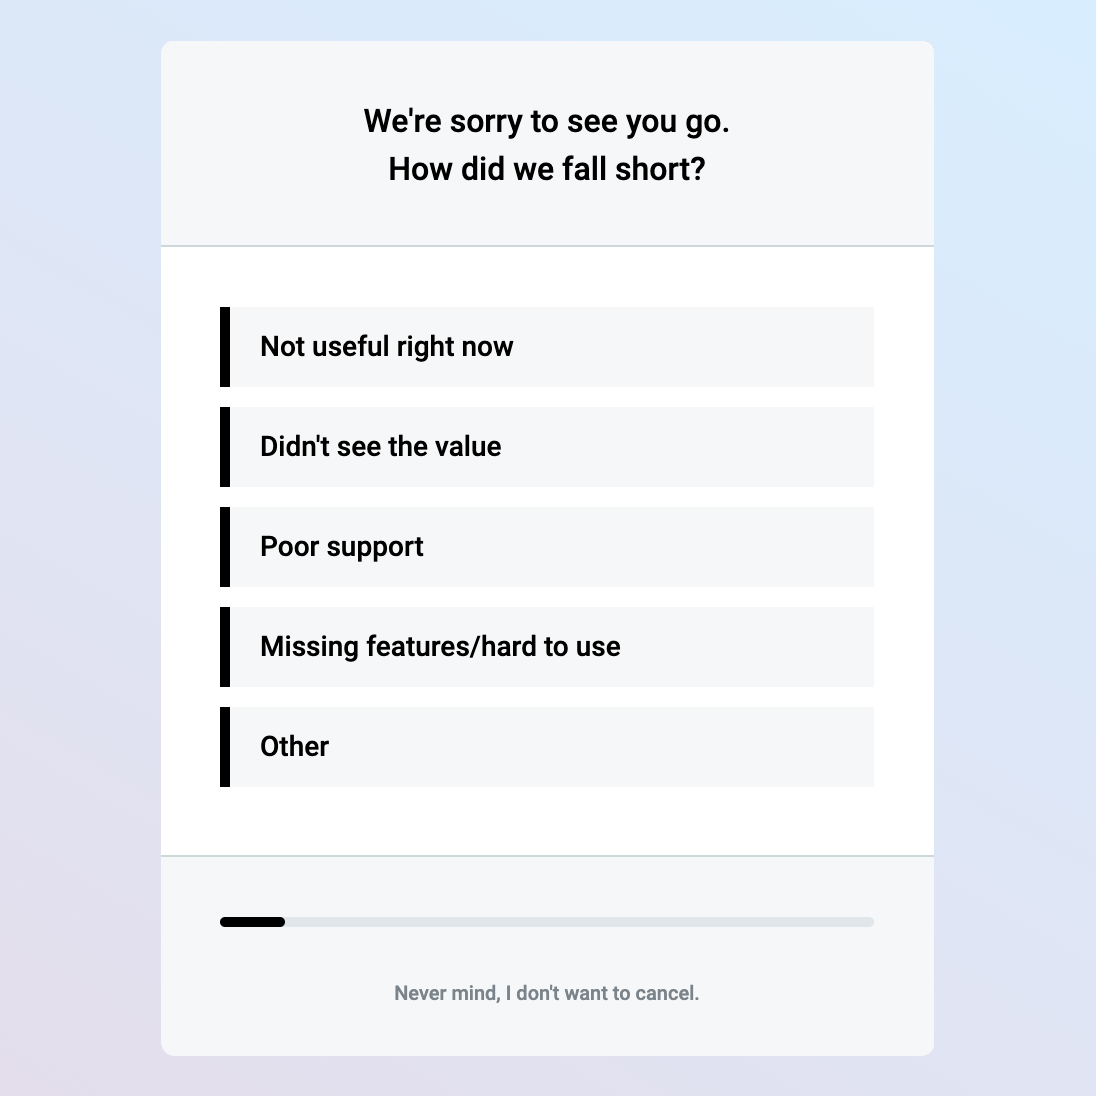 Retain Cancellation Flow modal step 1. It says: We're sorry to see you go. How did we fall short? The options are: not useful right now, didn't see the value, poor support, missing features, other.